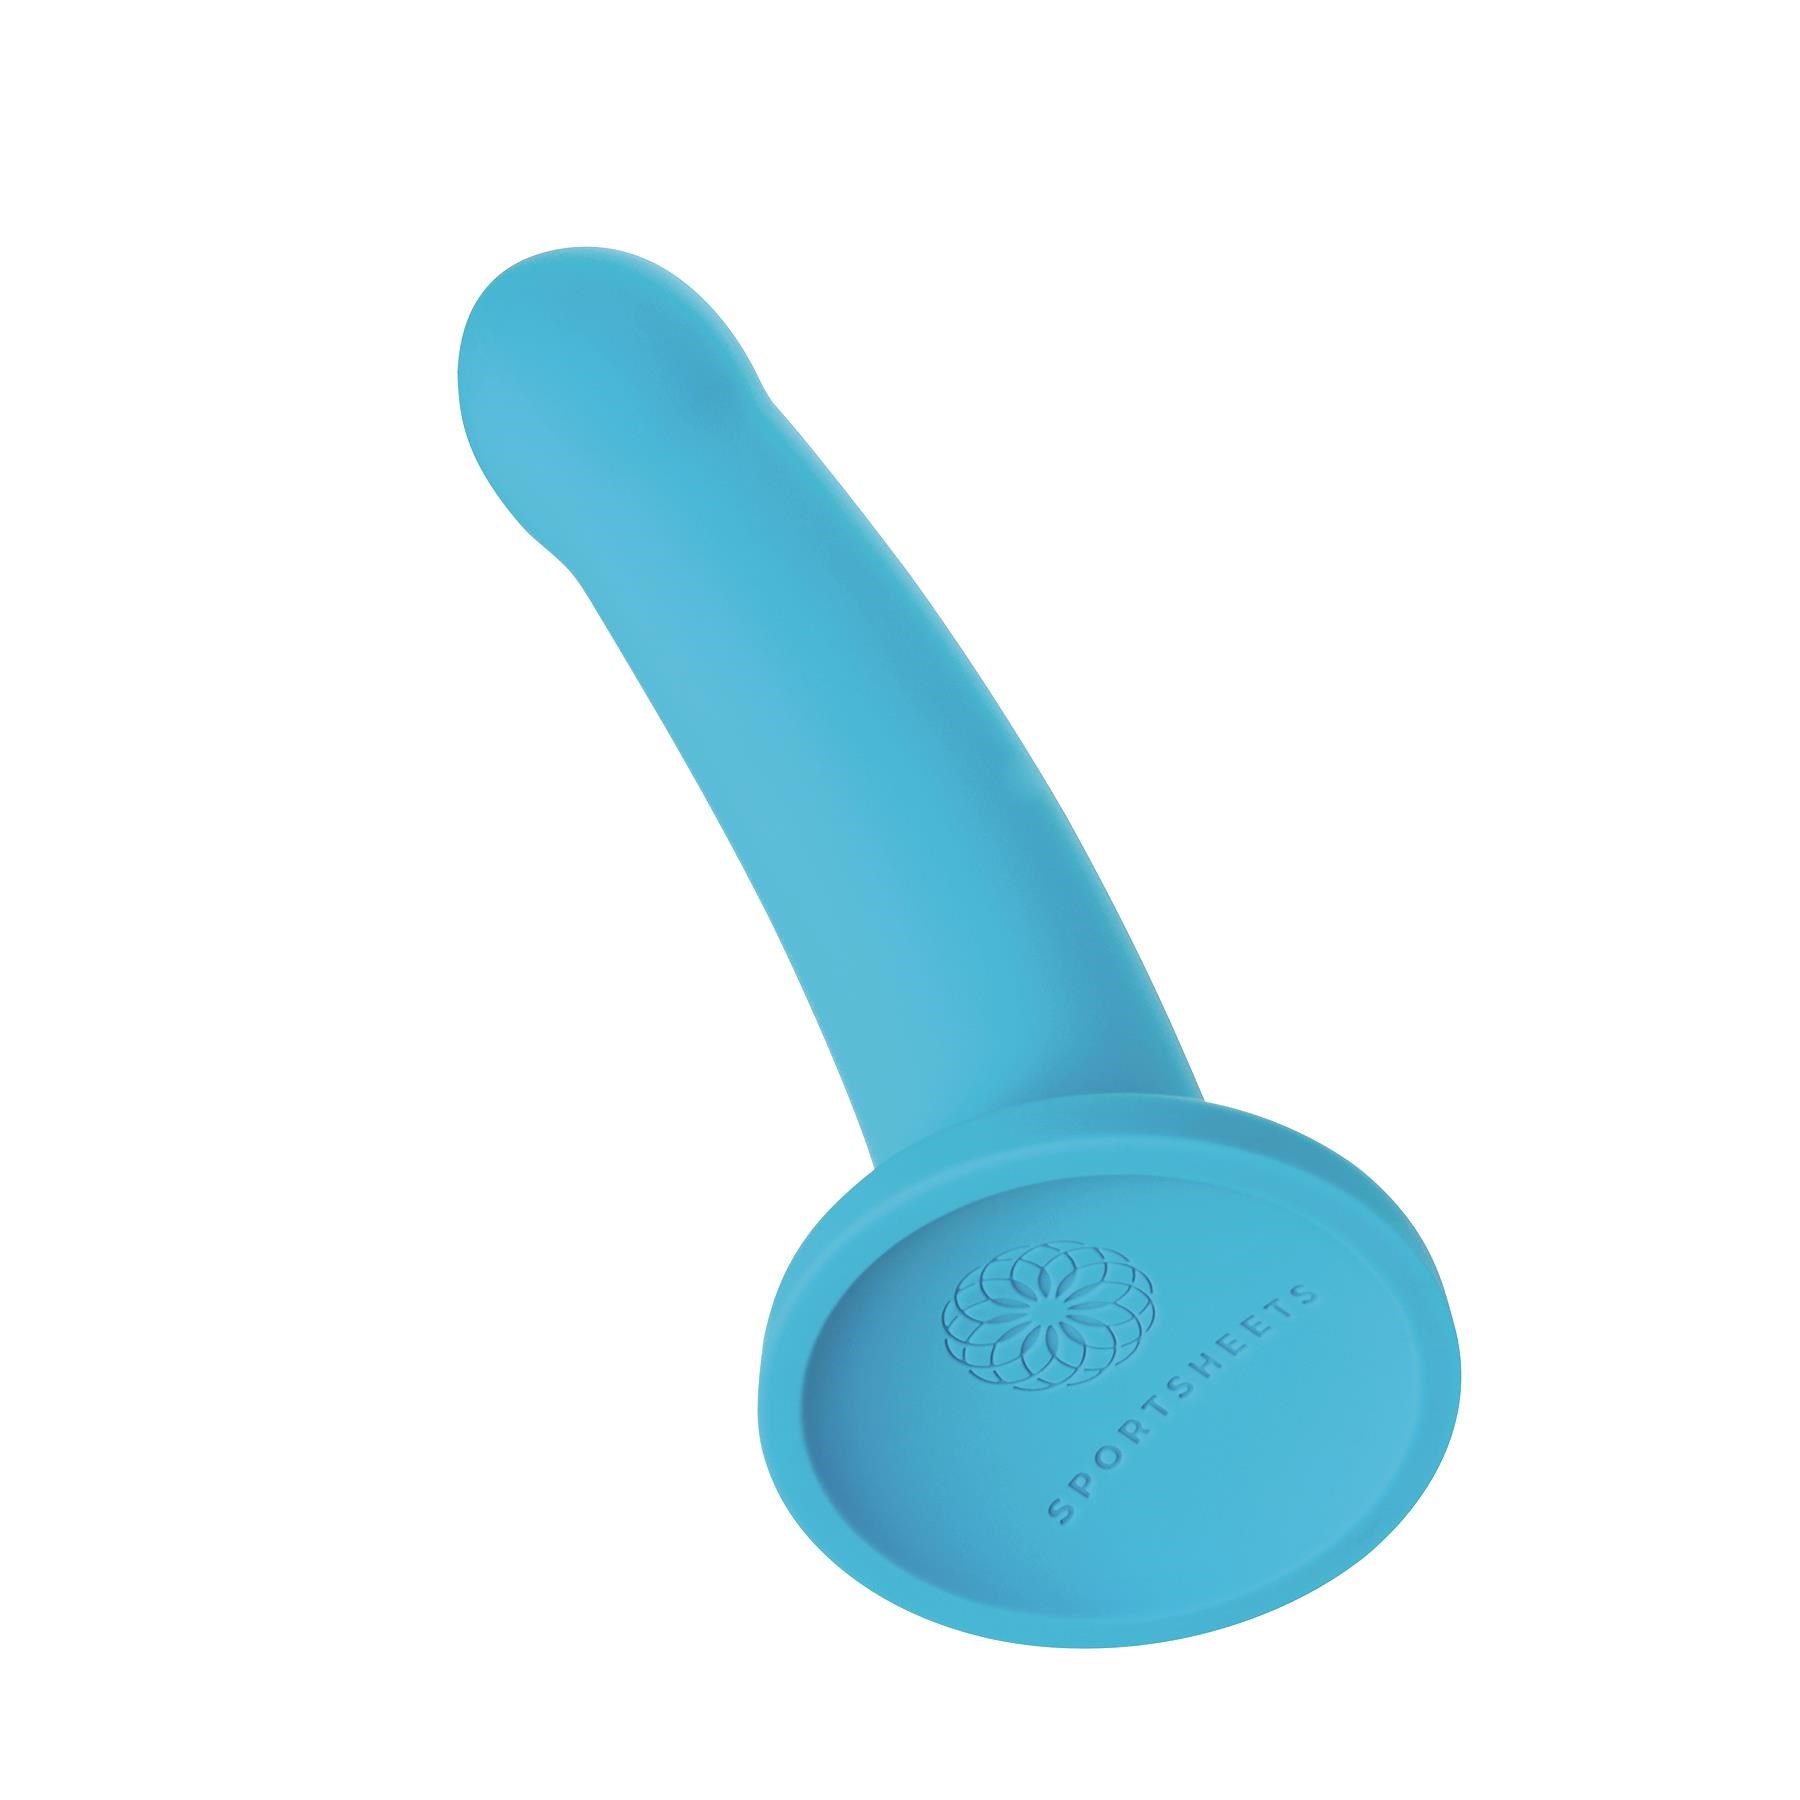 Sportsheets Nexus Collection 7" Silicone Dildo Showing Suction Cup - Turquoise